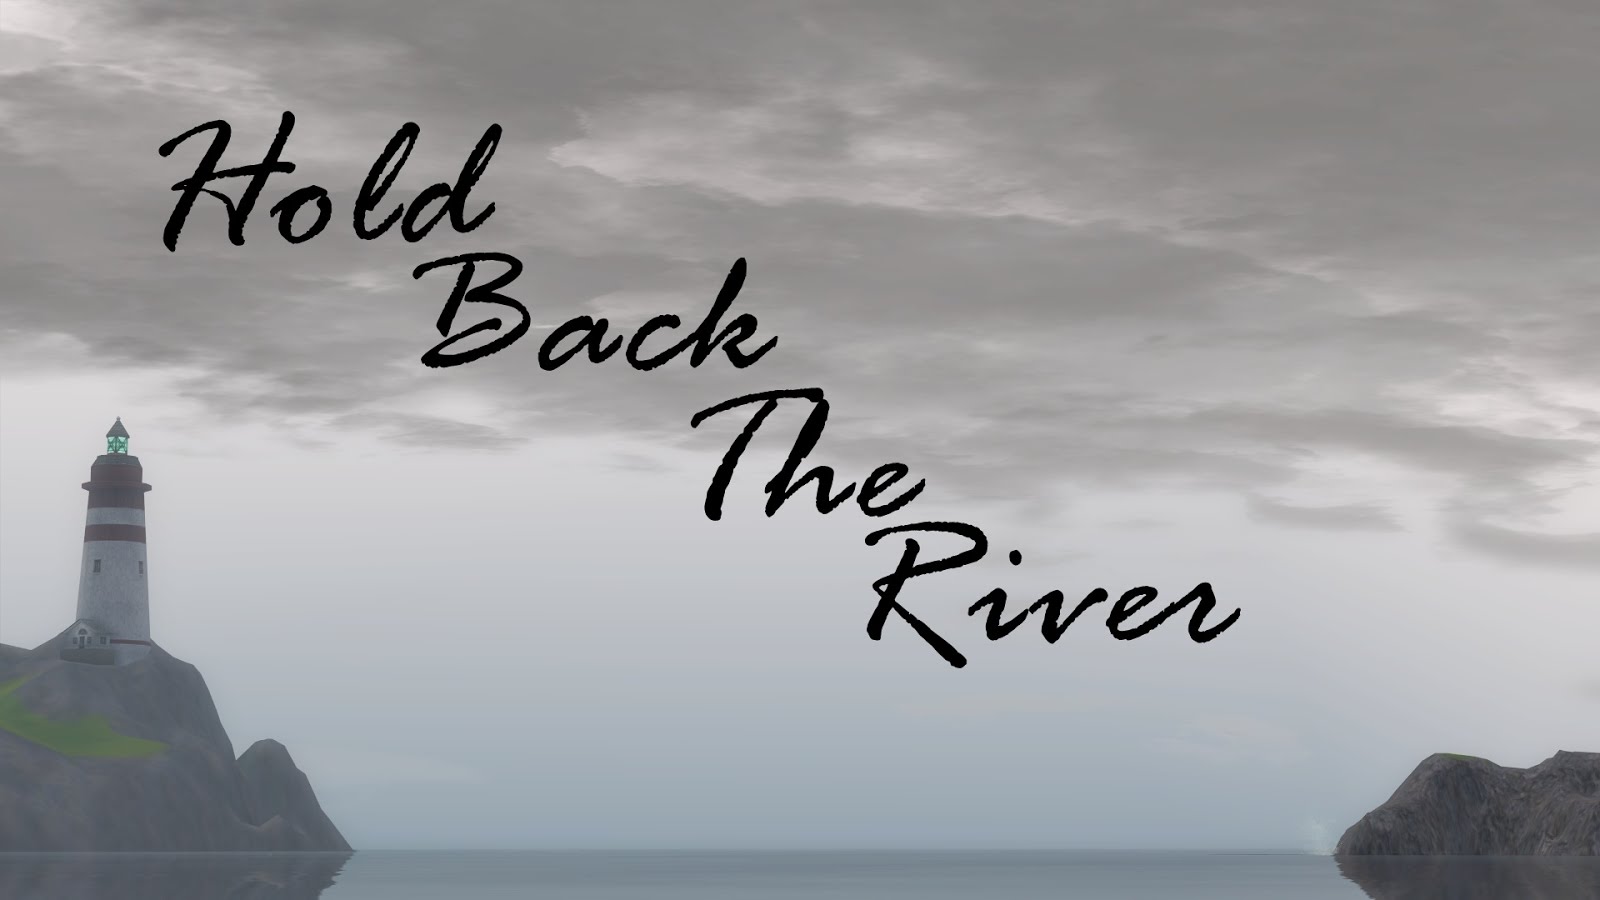 Hold back the river